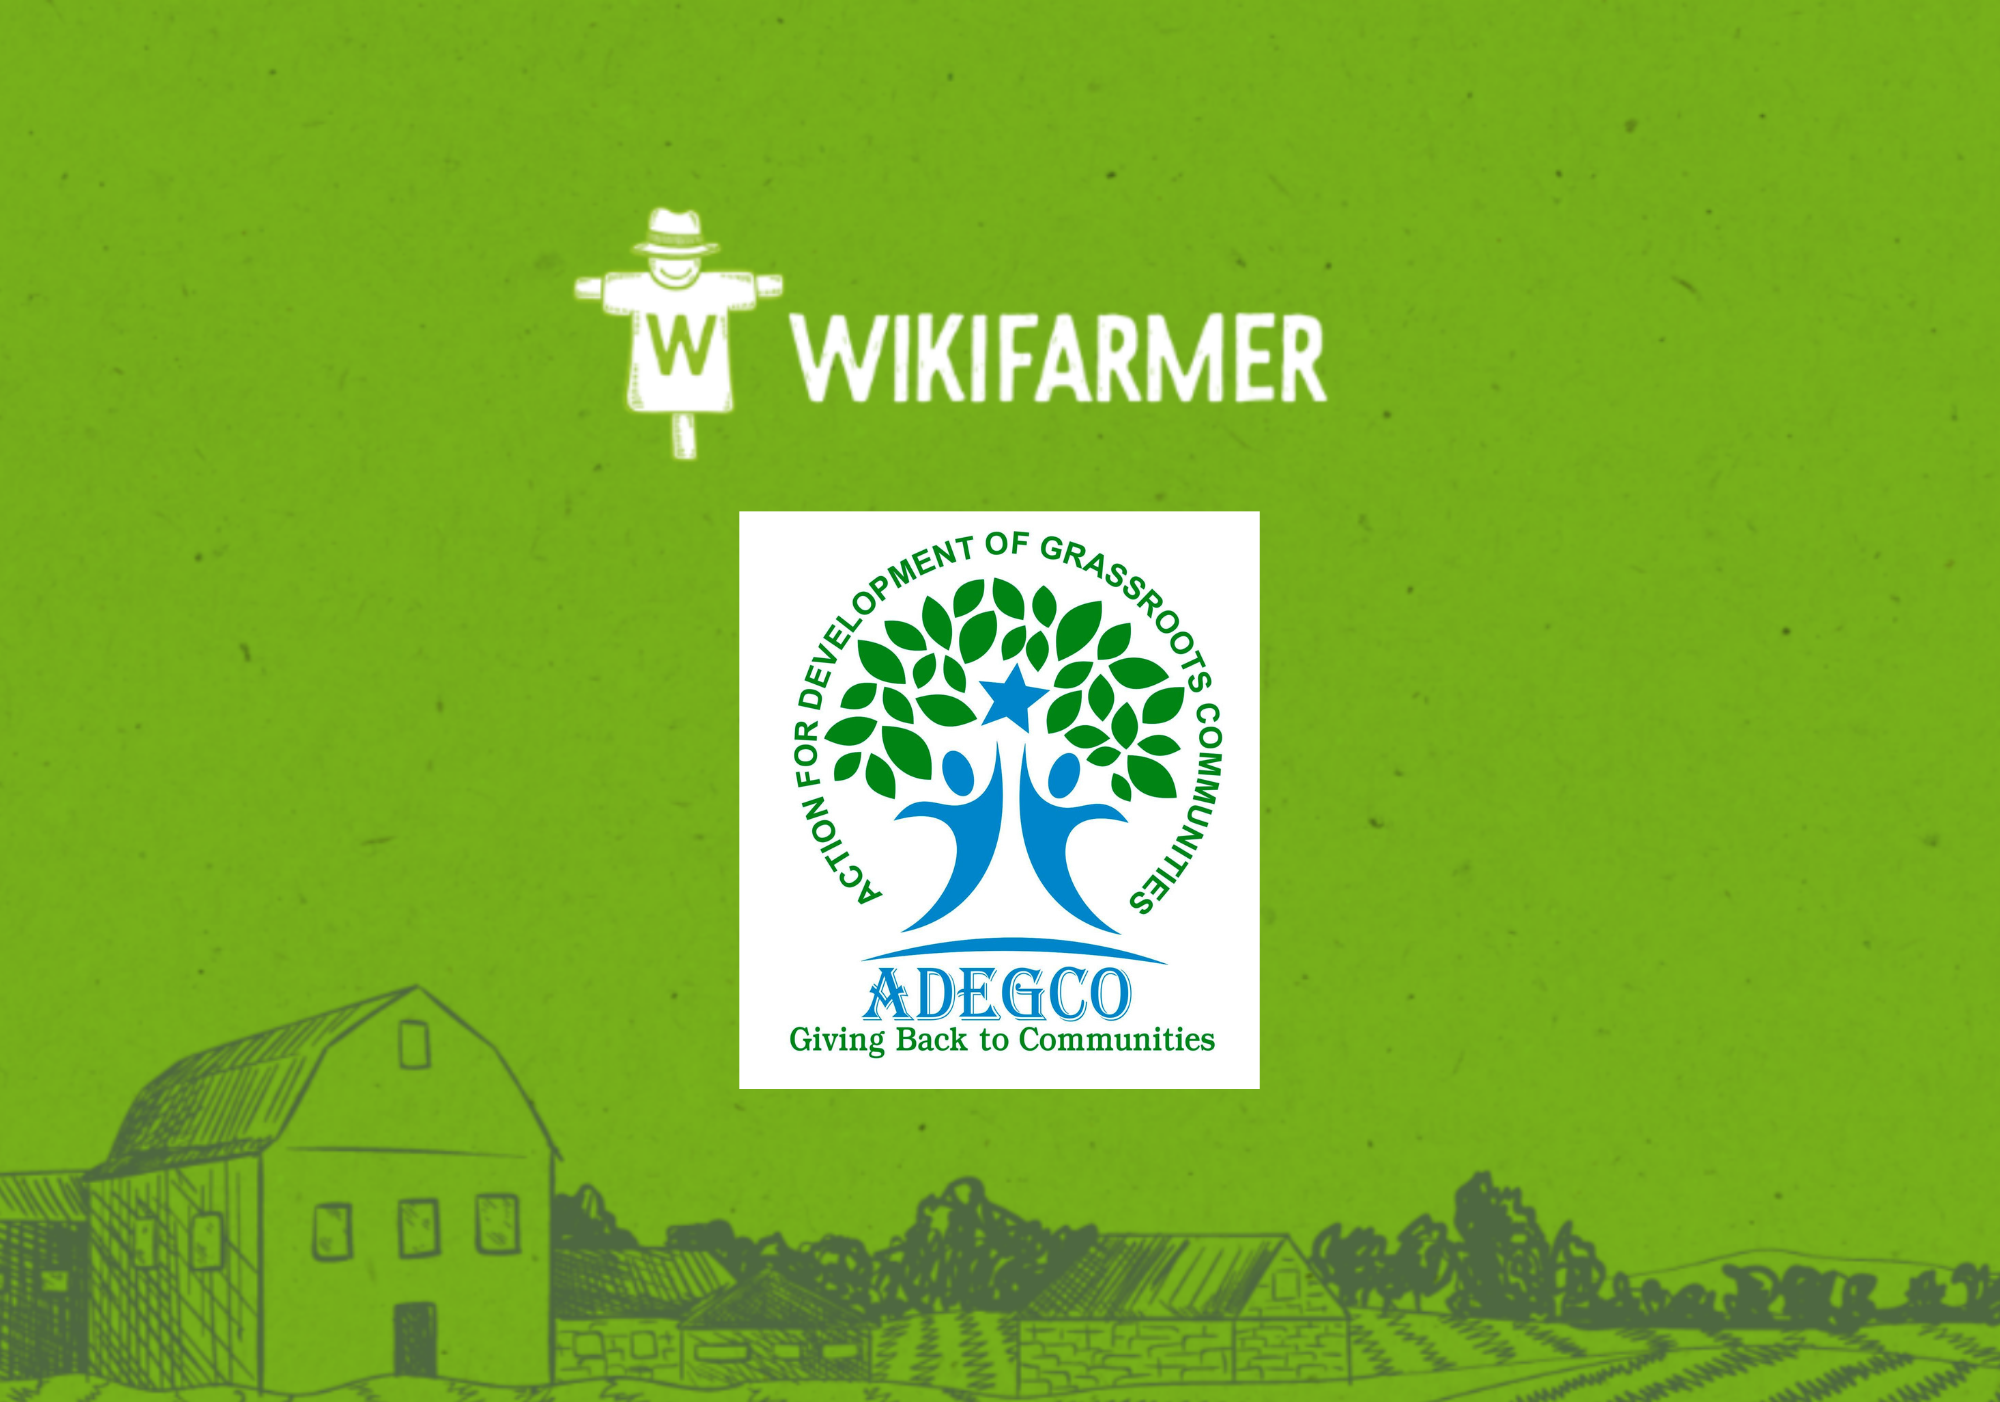 Partnership between Wikifarmer and Action for Development of Grassroots Communities (ADEGCO)